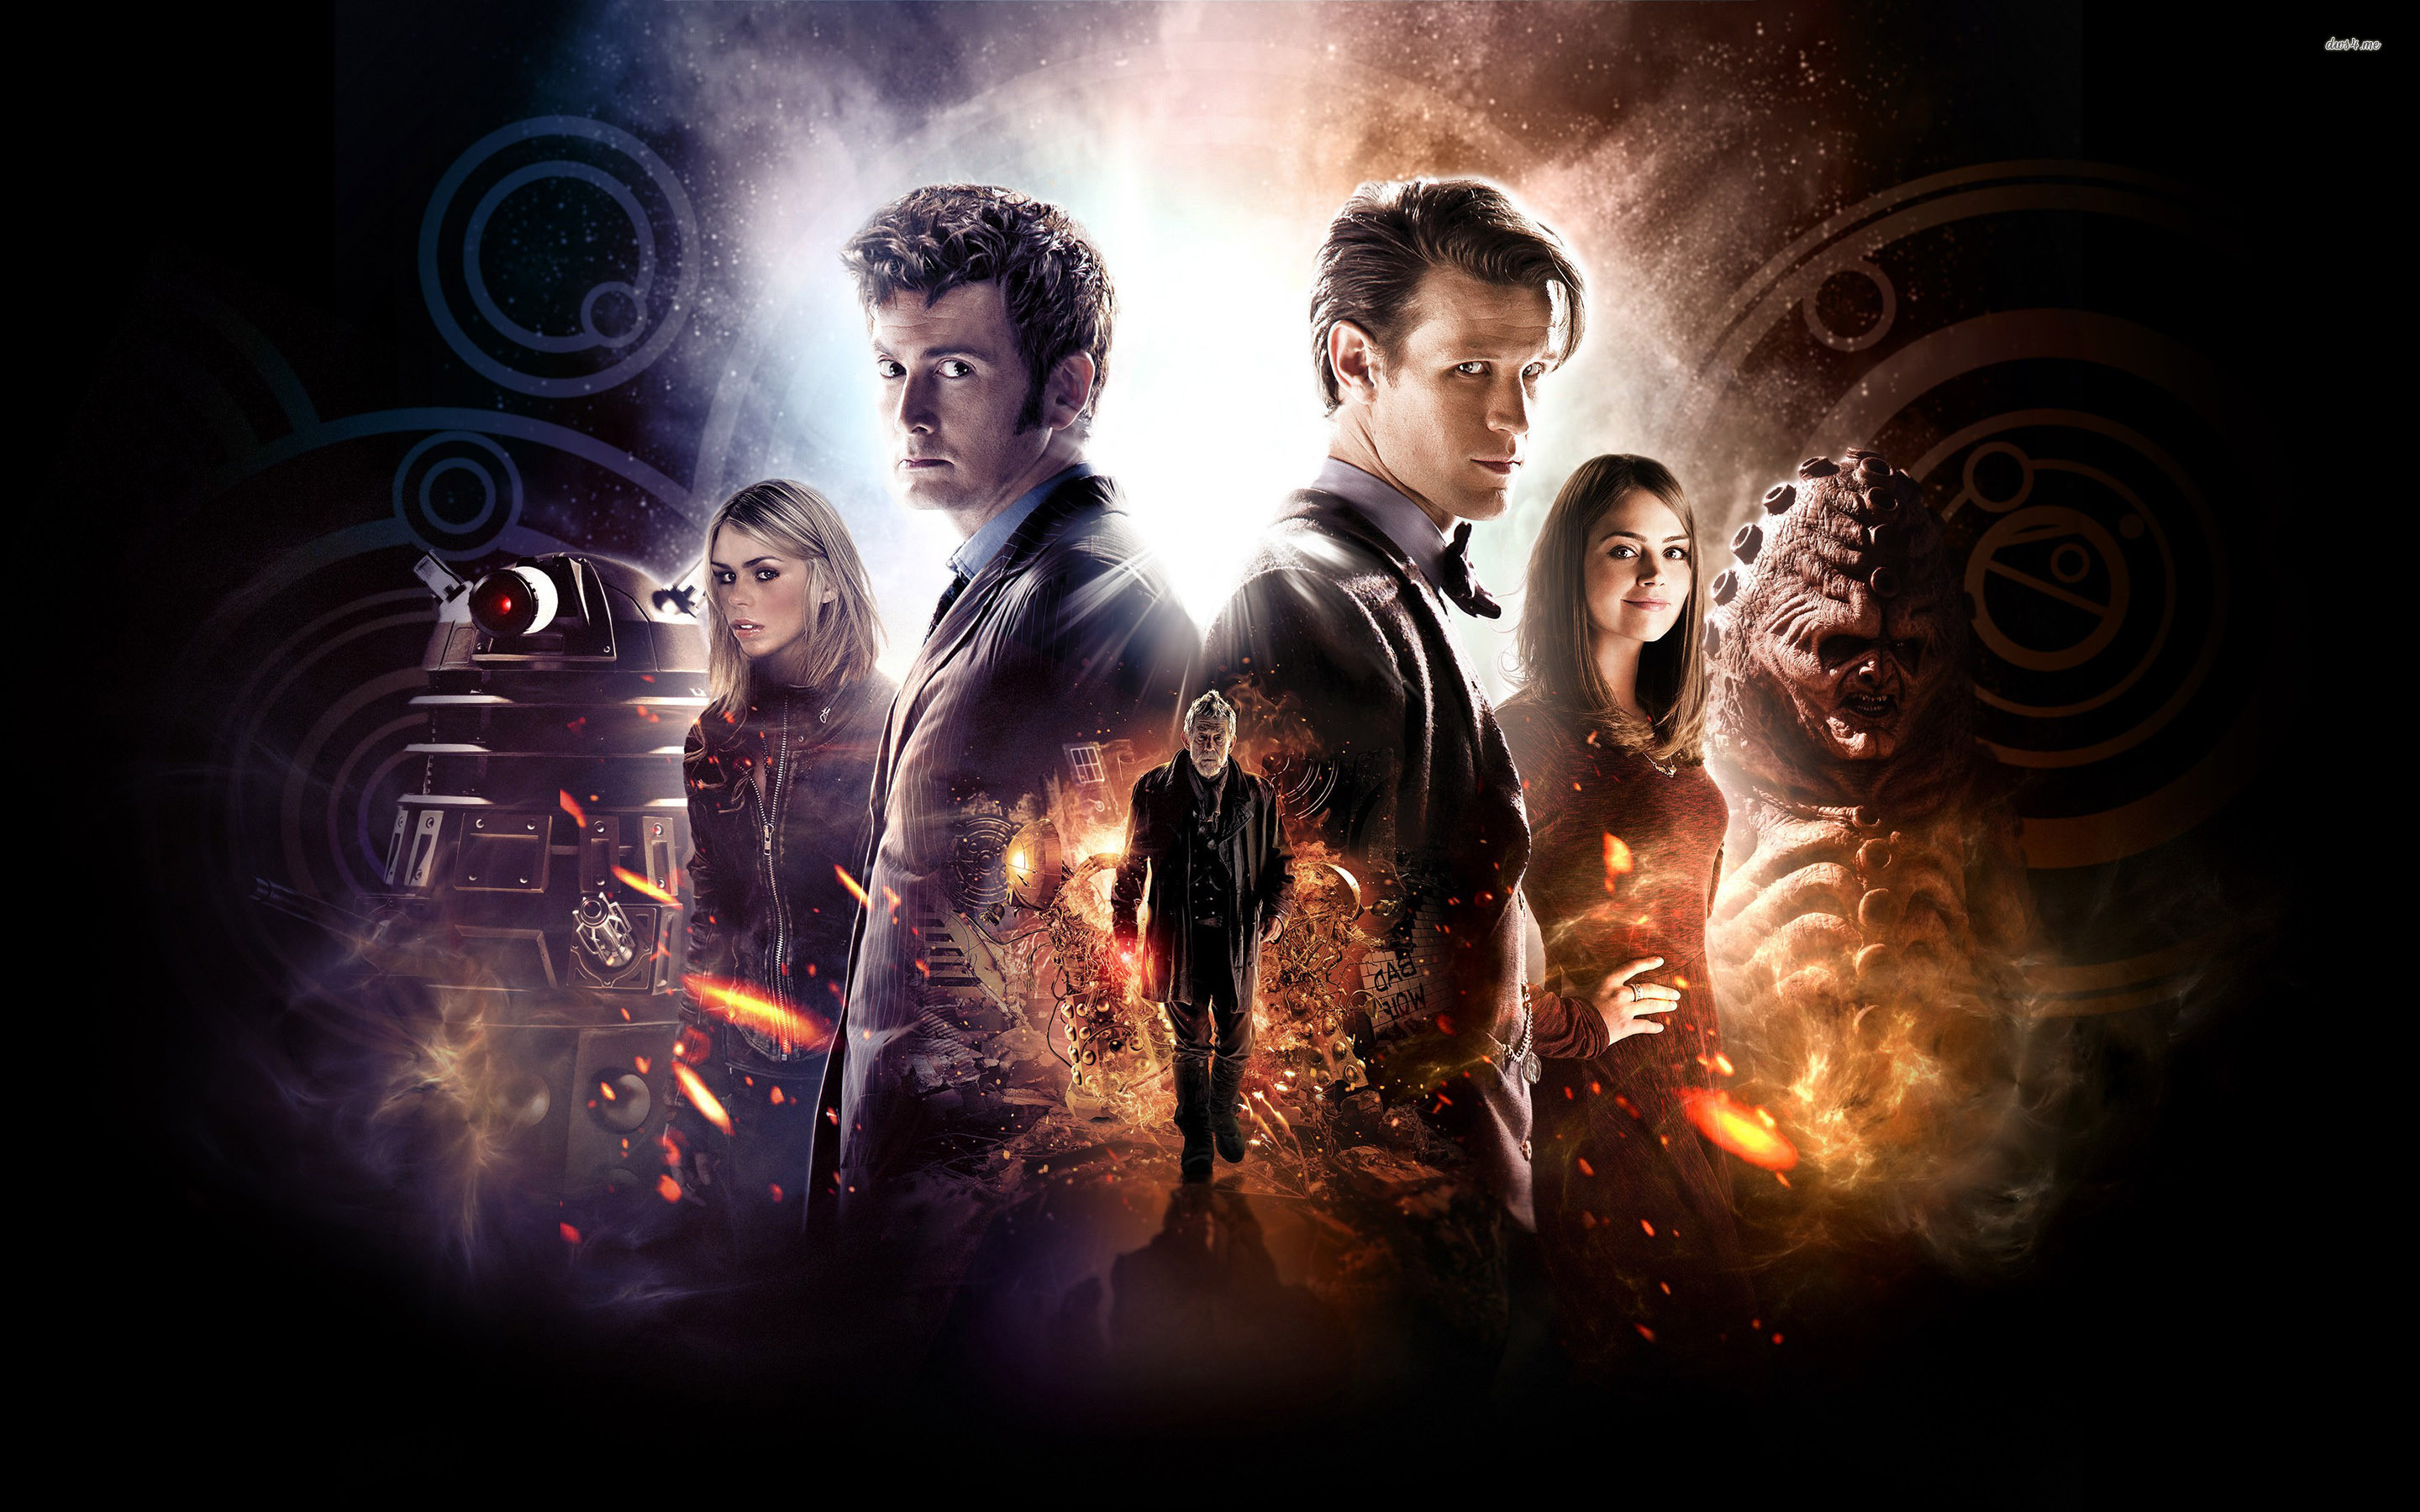 Fonds d'Ã©cran Doctor Who : tous les wallpapers Doctor Who